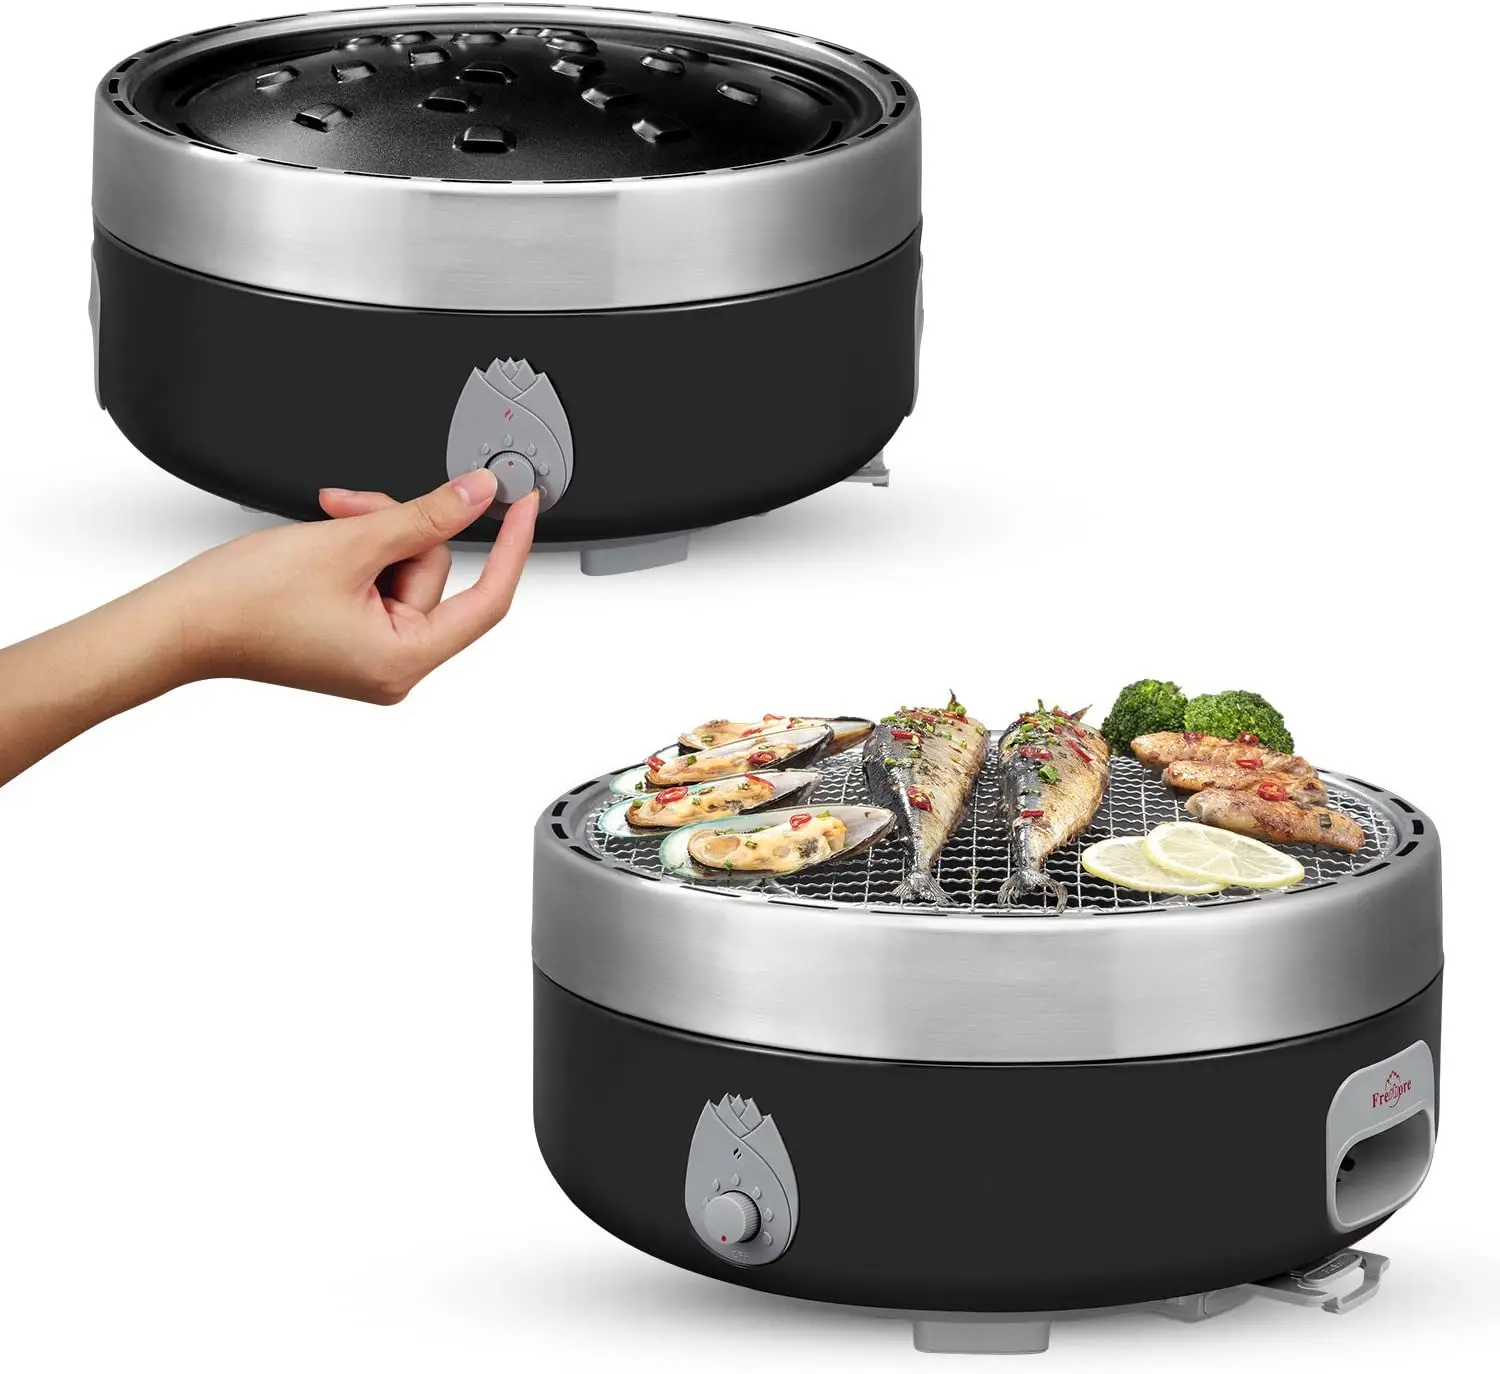 

Smokeless Grill Indoor & Outdoor Portable Charcoal Grill Garden BBQ Grill Perfect for 4-8 People Easy Making Delicious Food